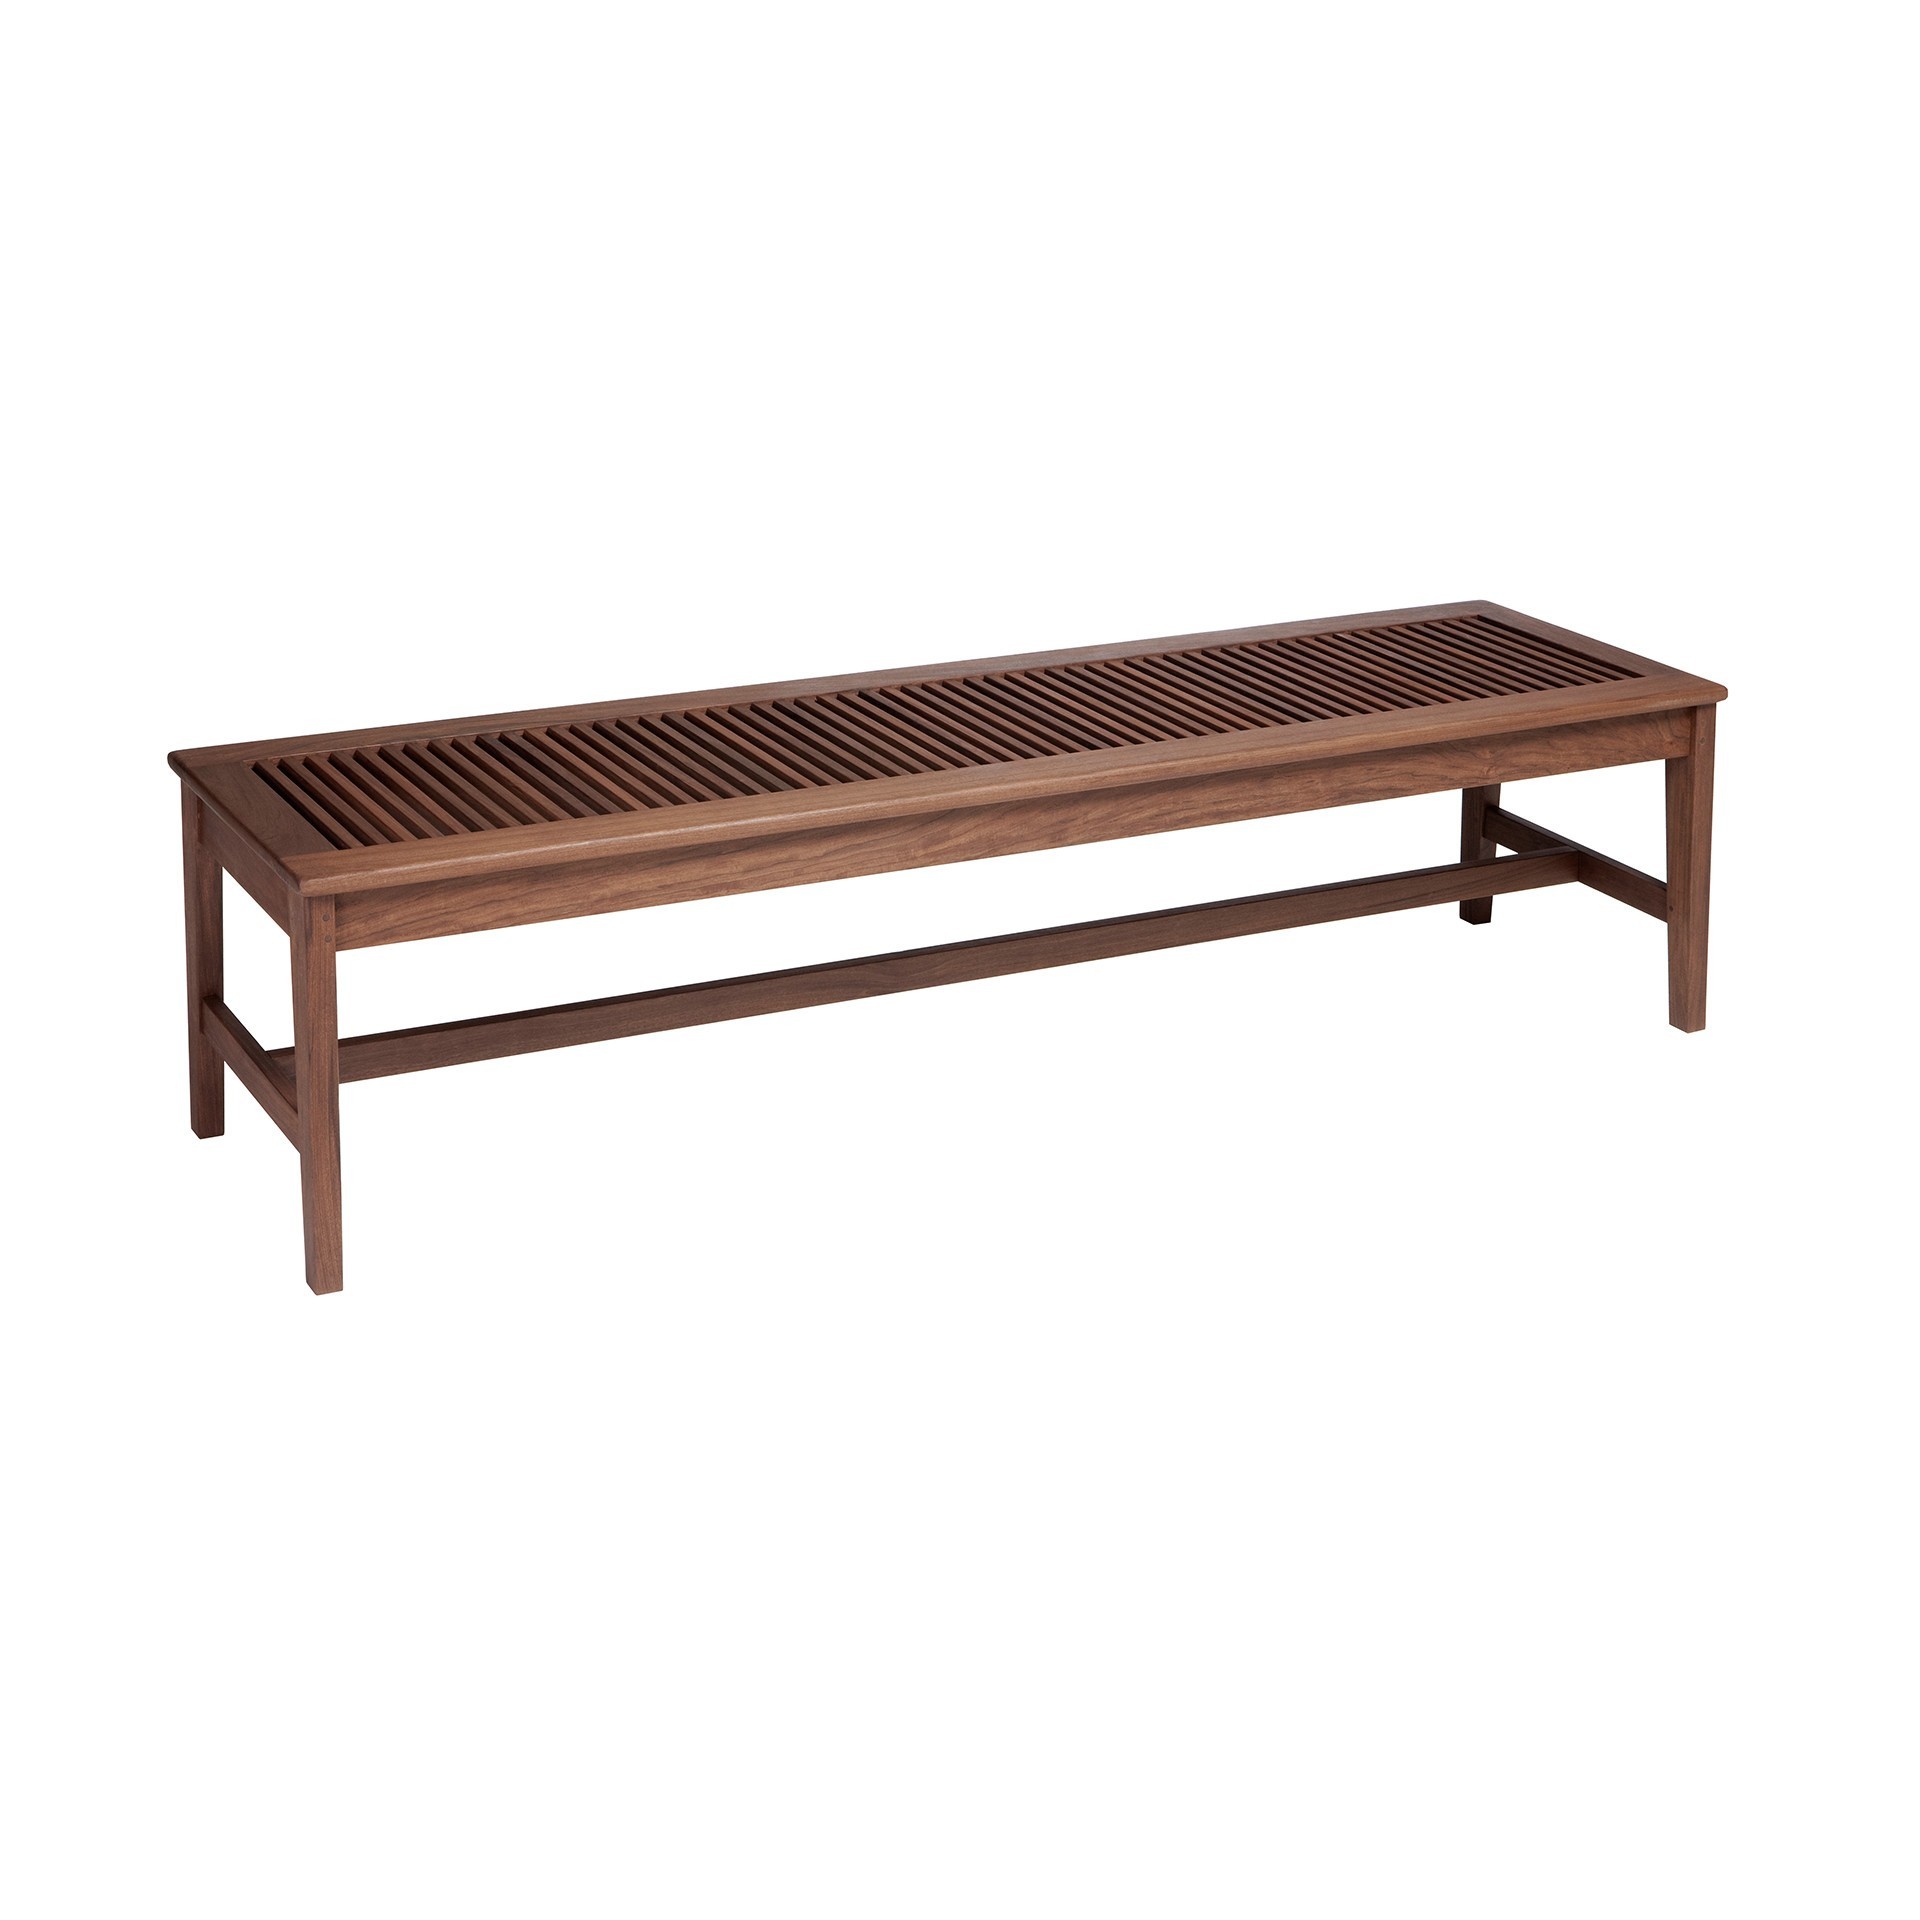 Wooden slatted bench Hausers Patio